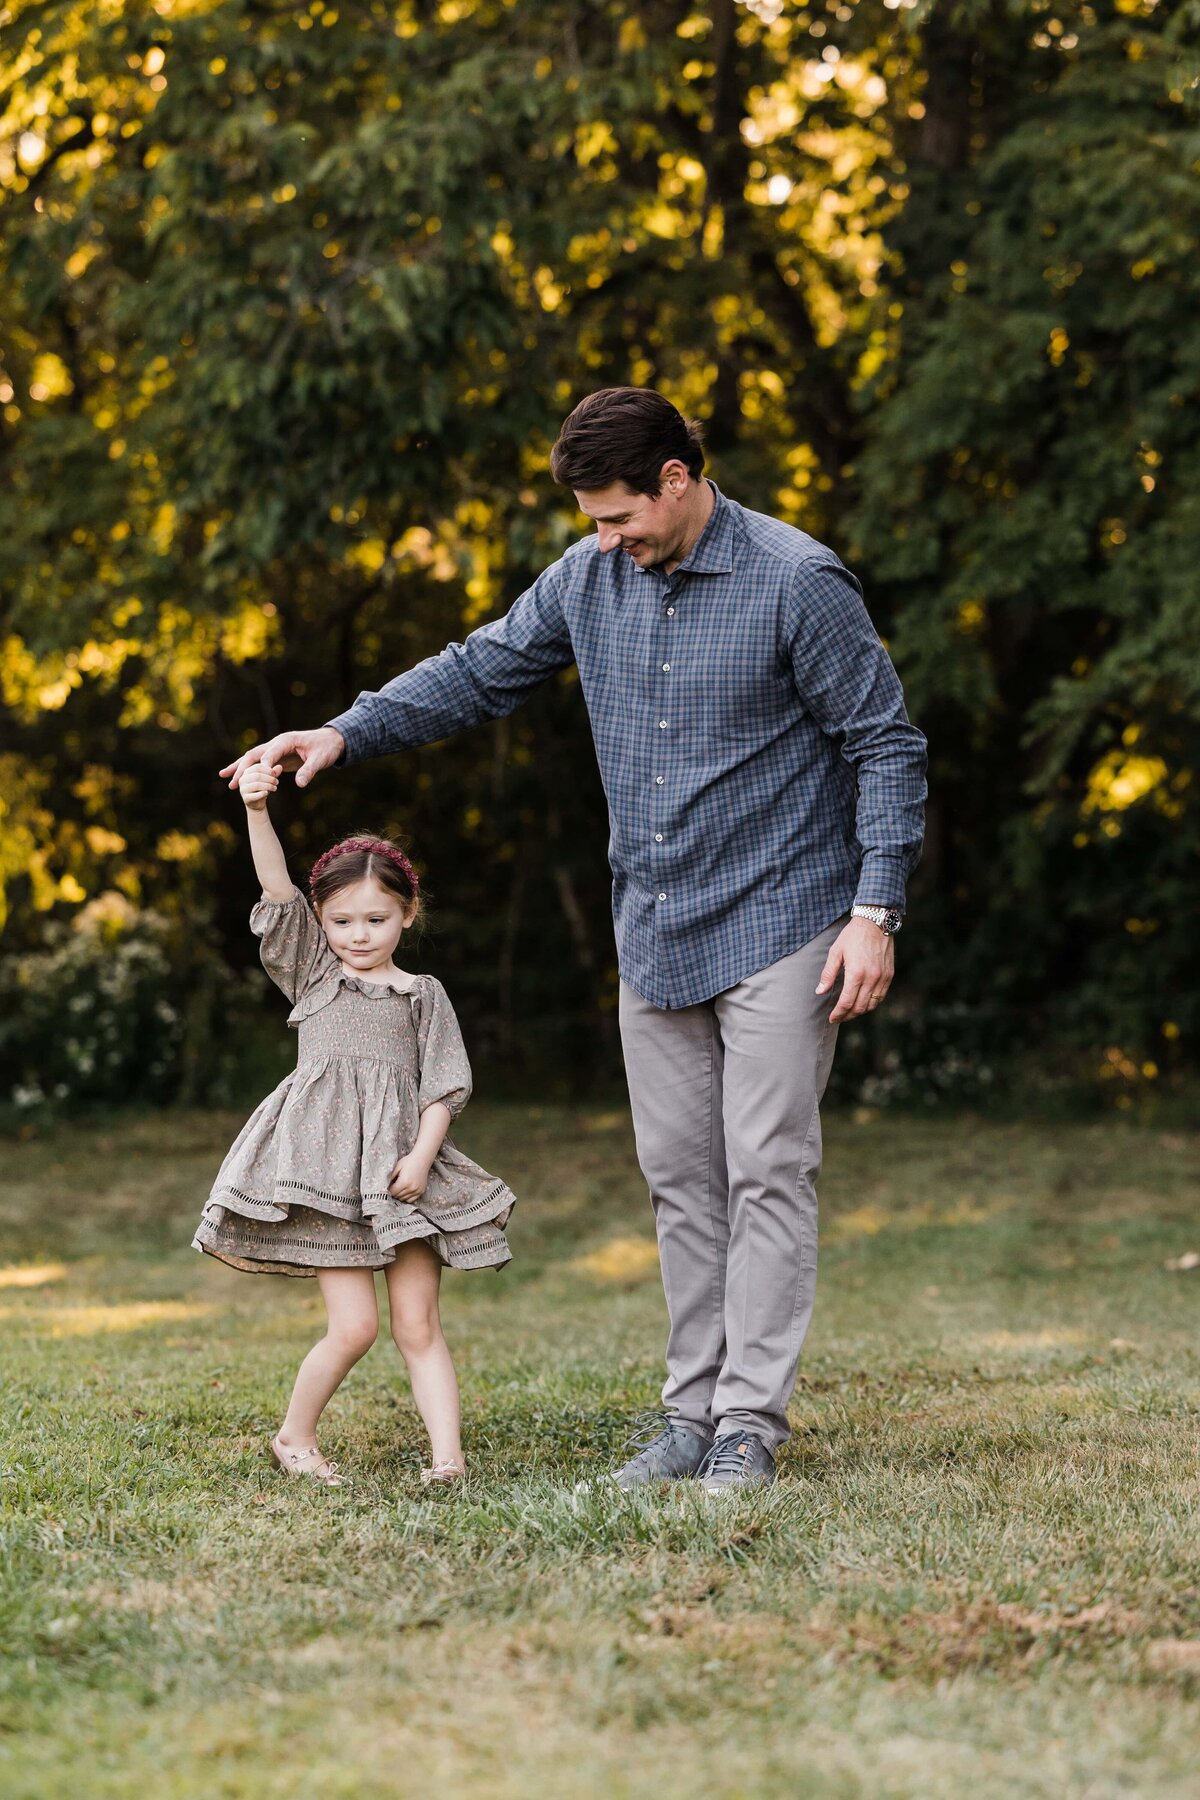 A Pittsburgh family photographer captures a touching moment of a man assisting a young girl in a twirling dance move on a grassy field.